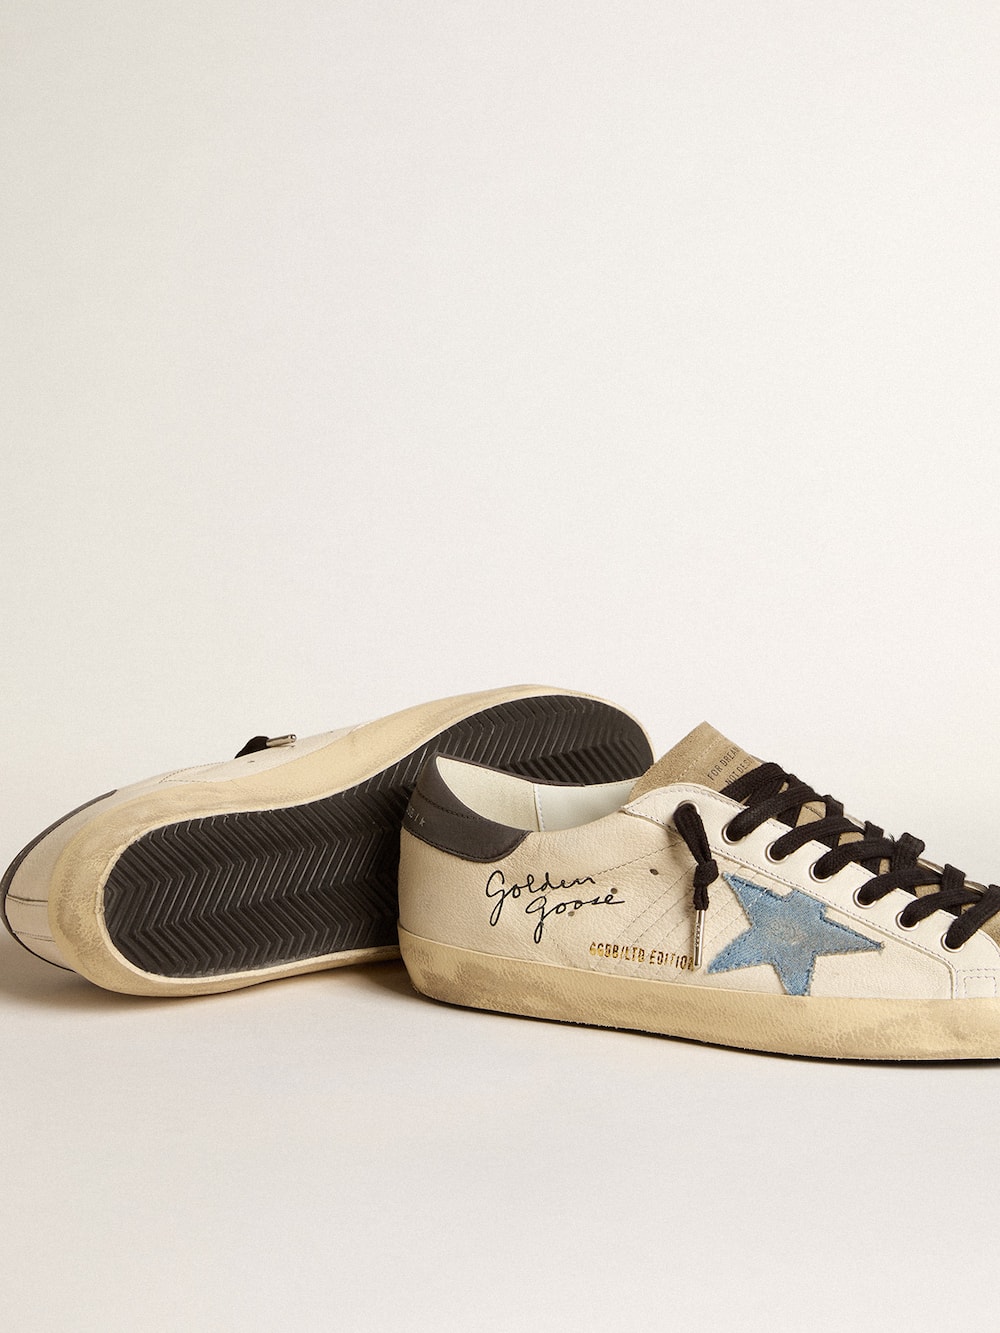 Golden Goose - Men's Super-Star LTD in nappa with denim star and gray leather heel tab in 